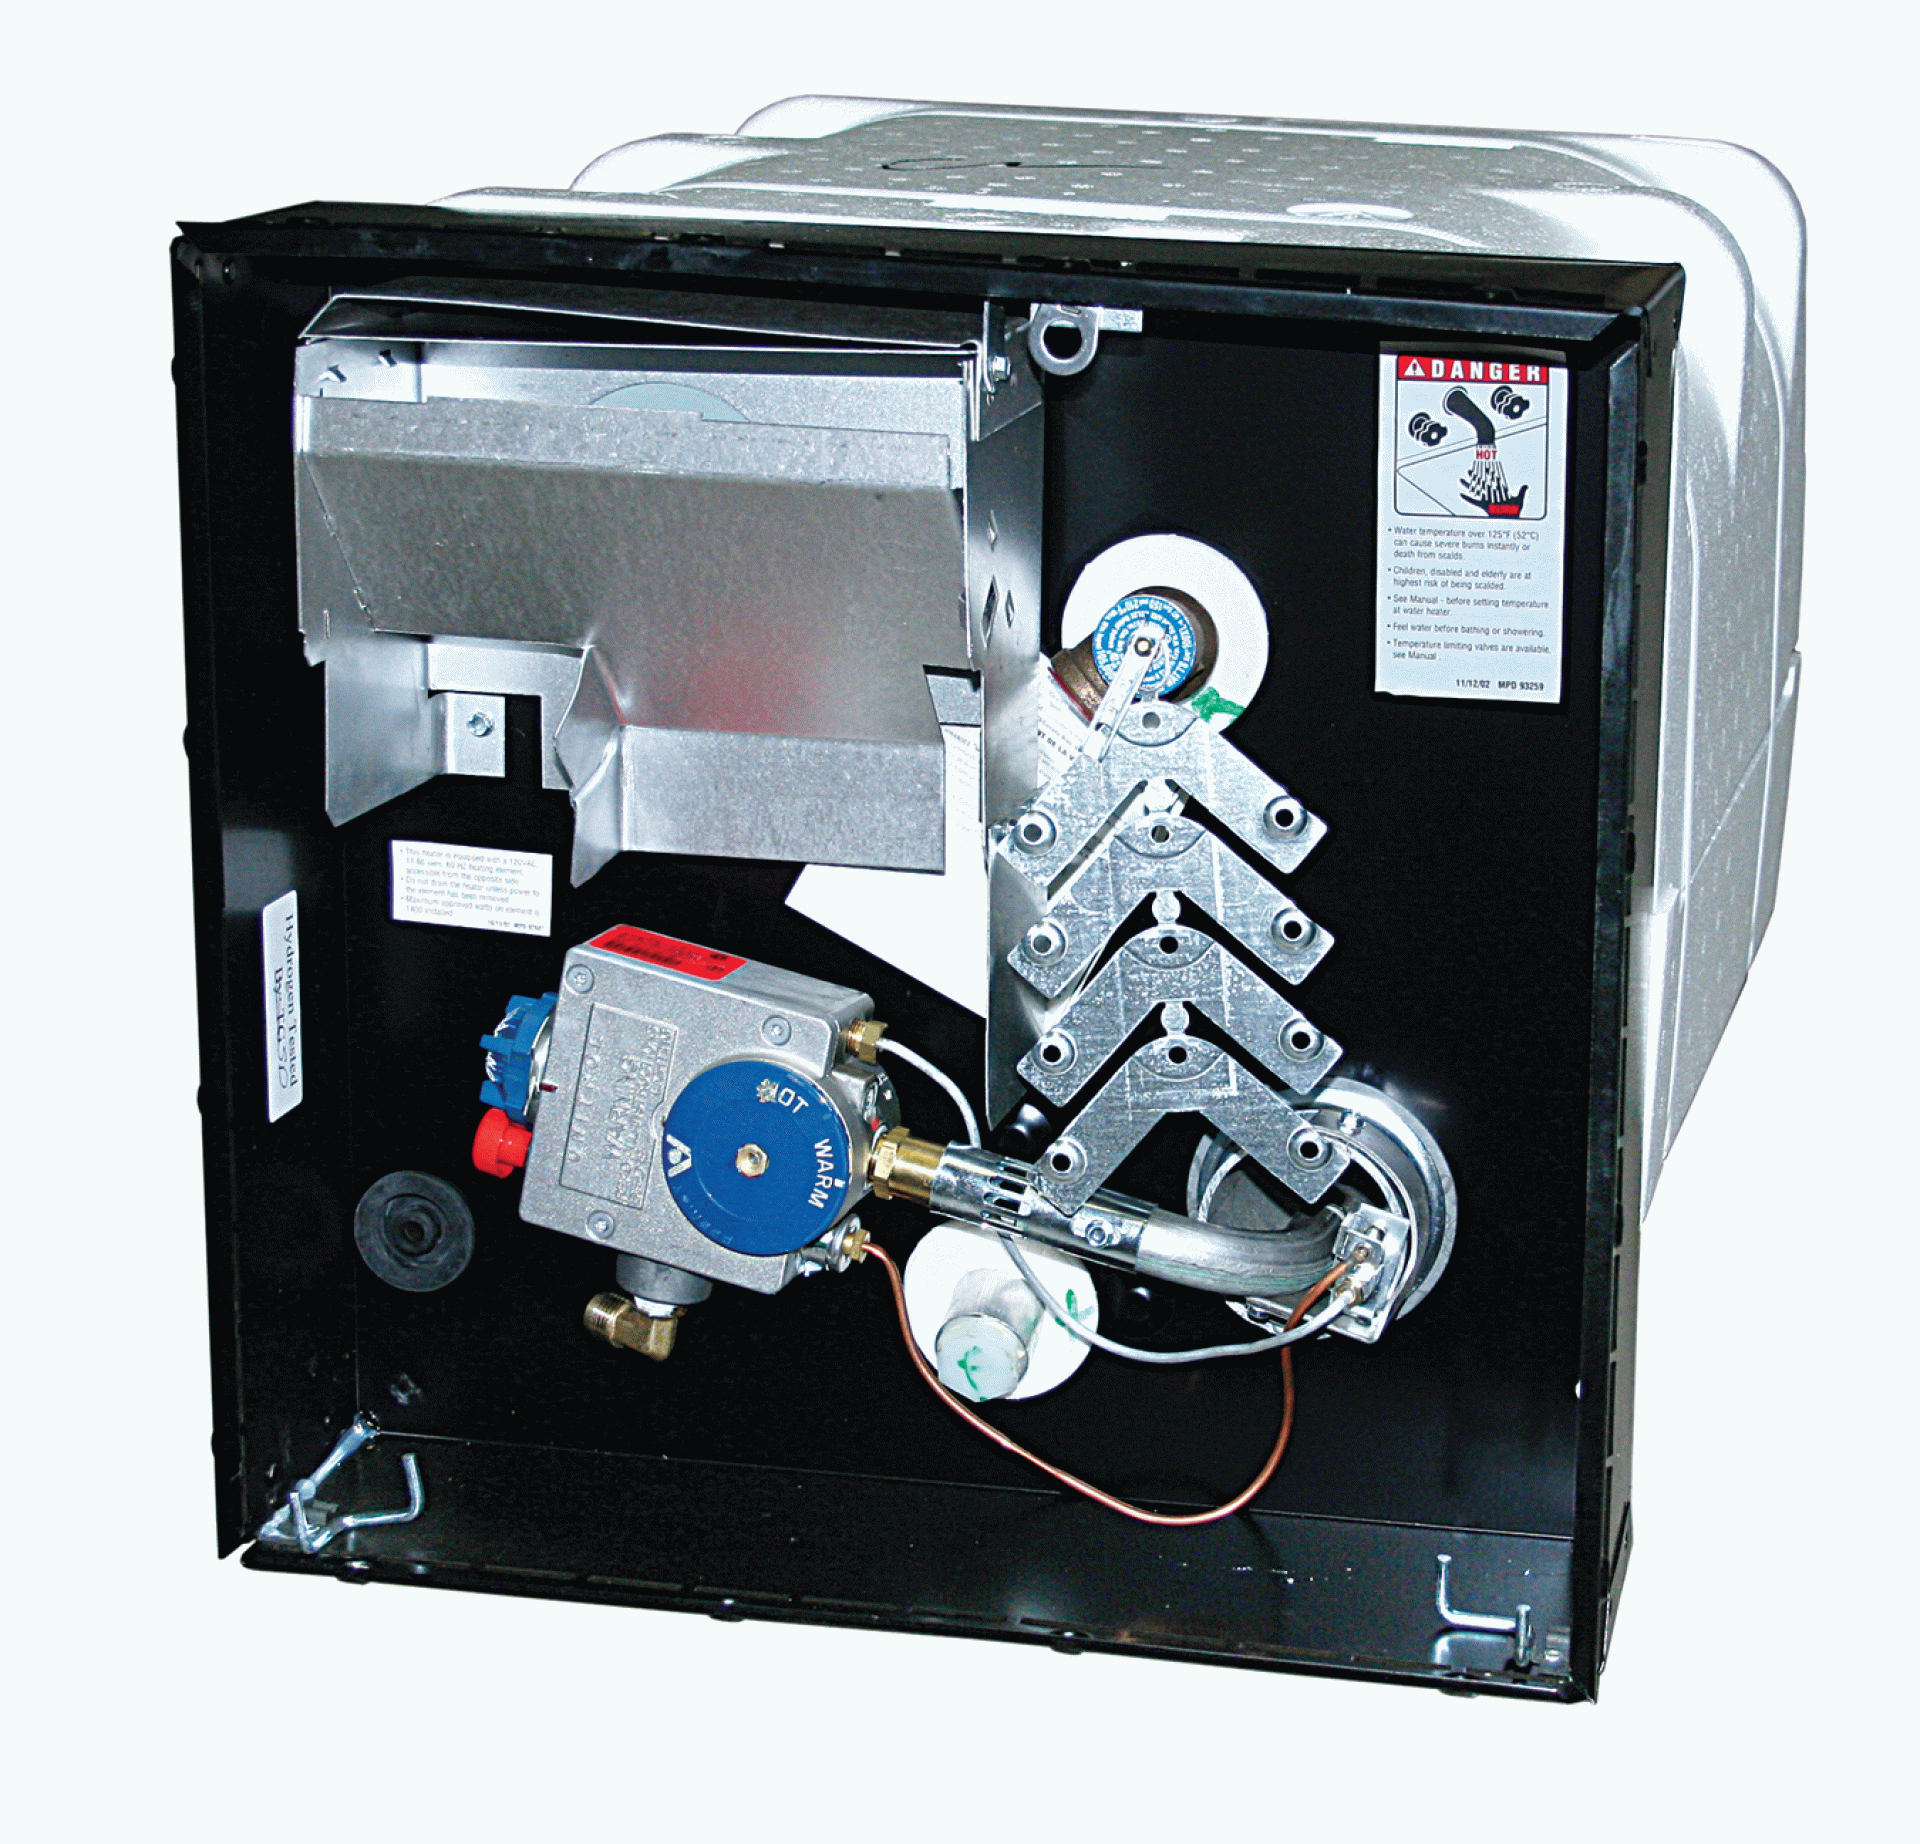 ATWOOD MOBILE PRODUCTS LLC | 94186 | GC10A-2 COMBINATION GAS & ELECTRIC WATER HEATER 10 GALLON